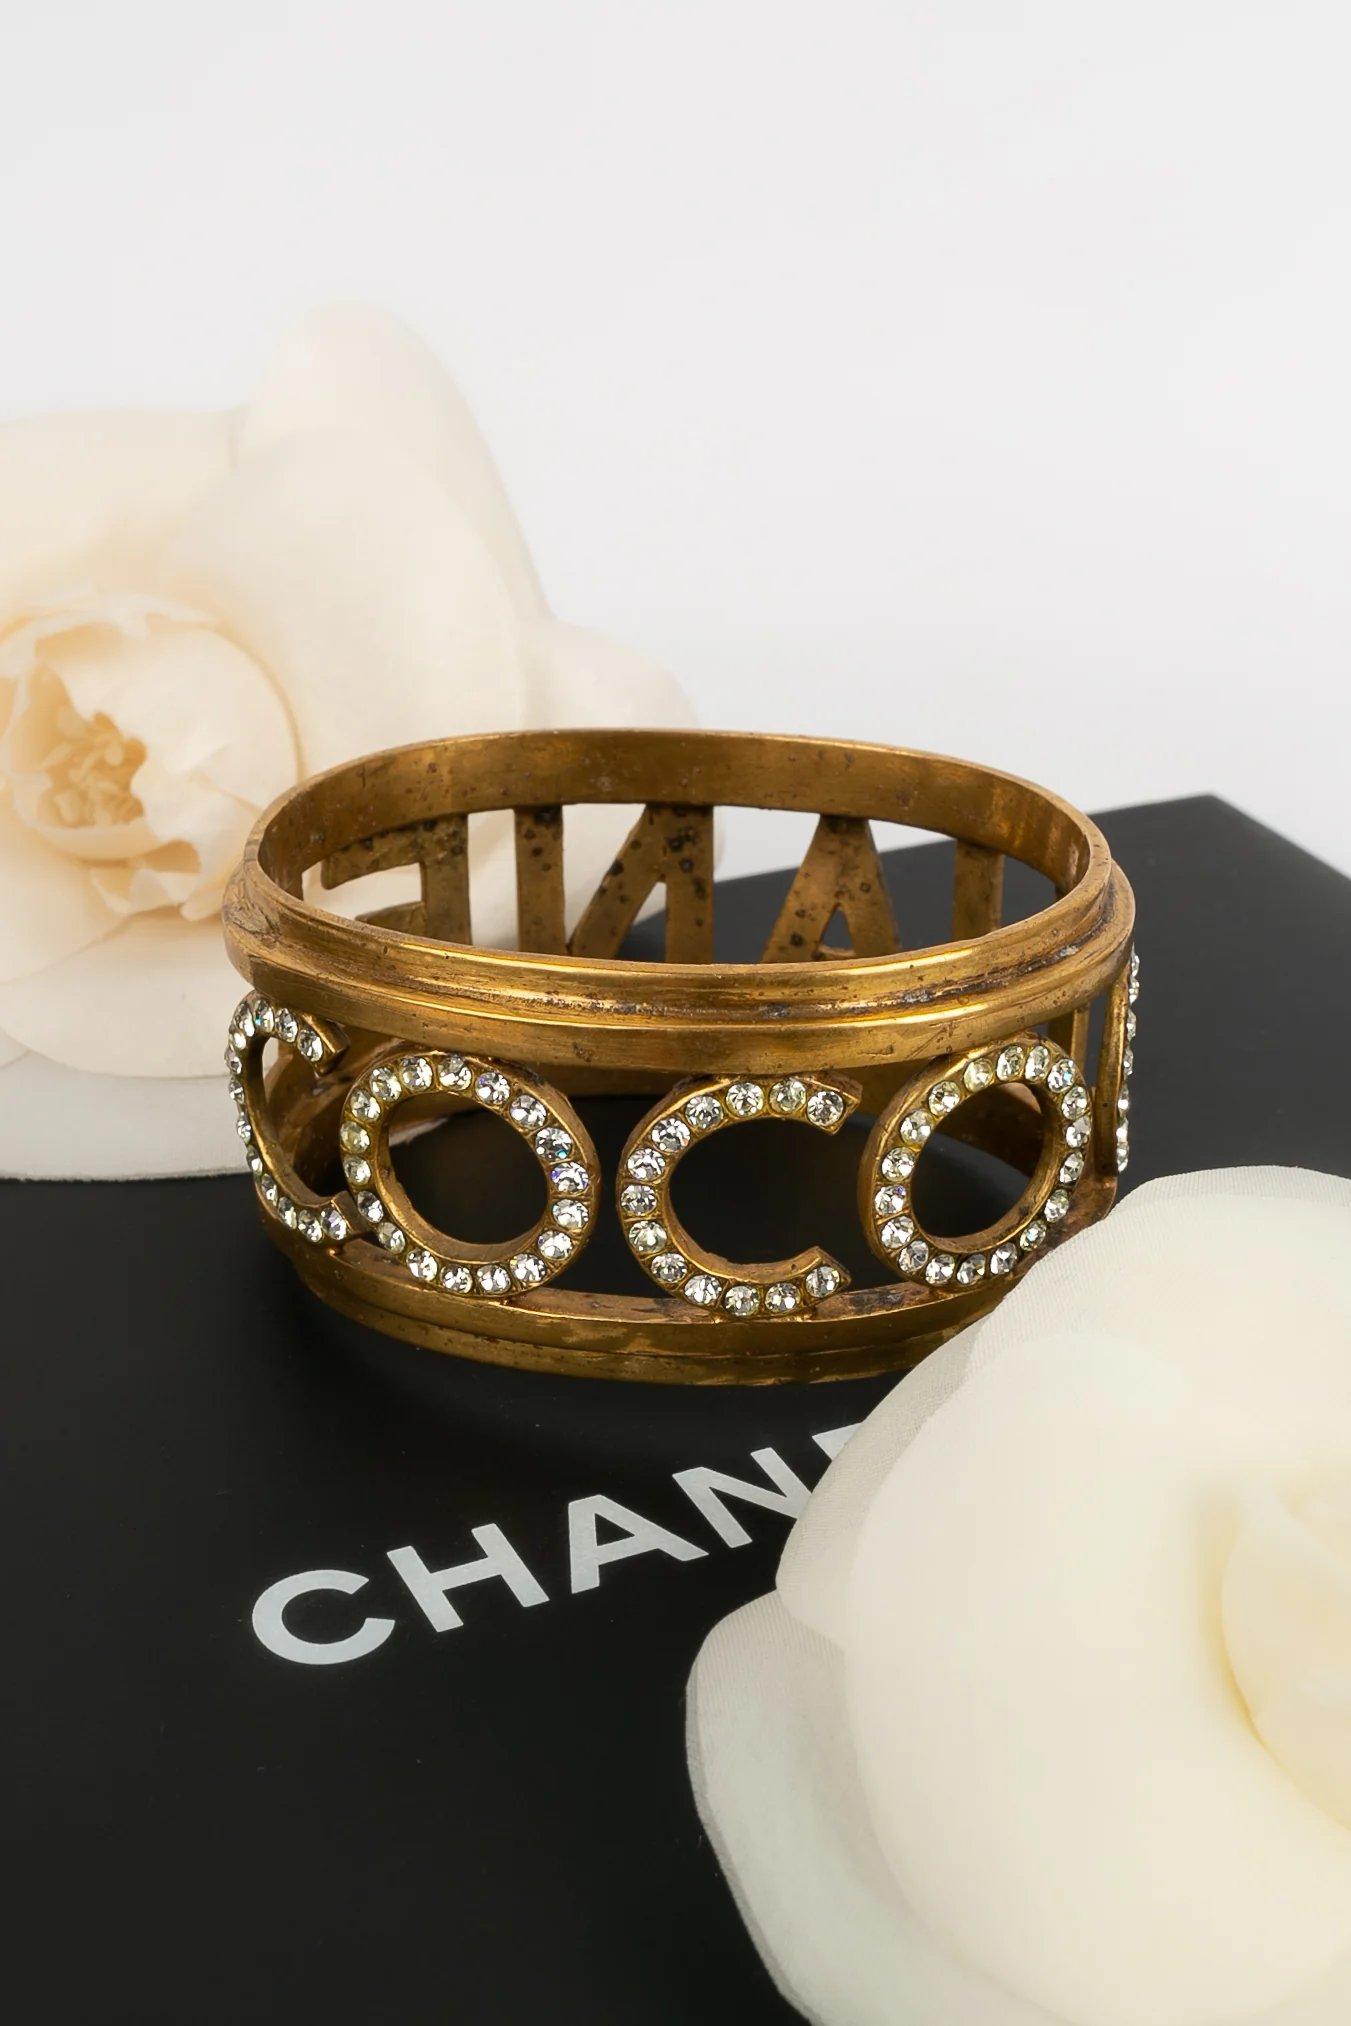 Chanel Gold Metal Cuff Bracelet Paved with Rhinestones For Sale 2